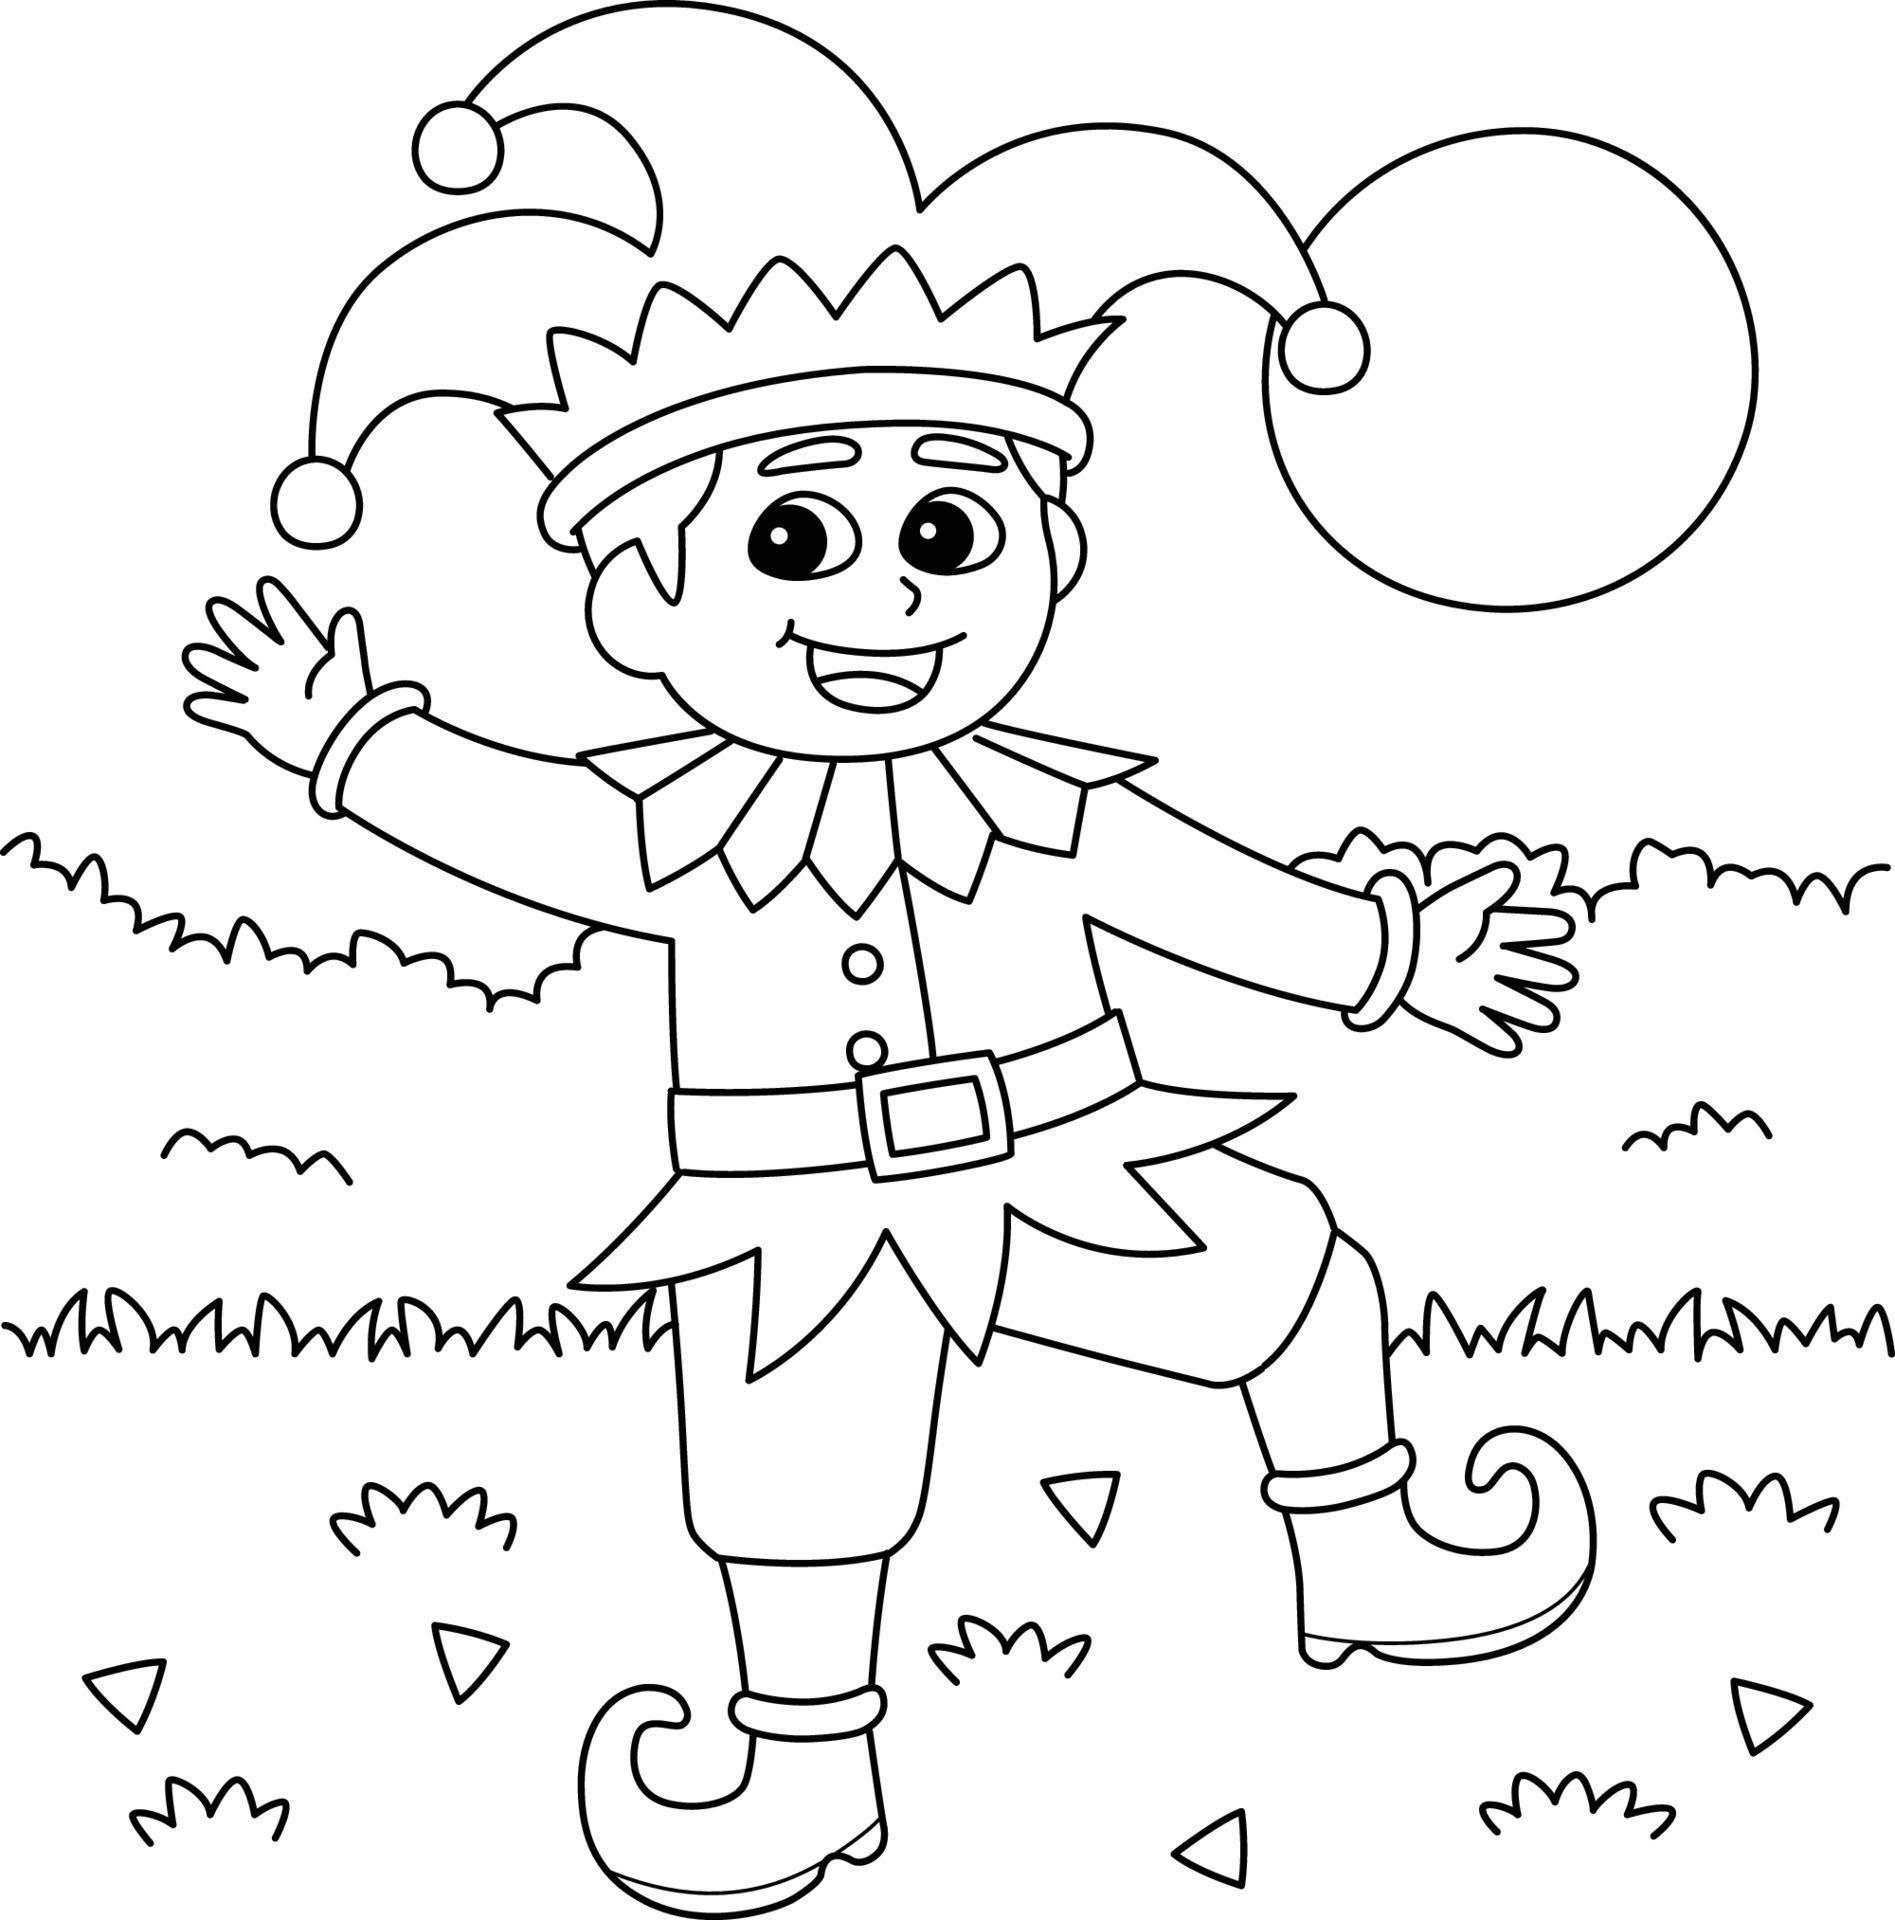 Mardi Gras Jester Boy Coloring Page for Kids 15656290 Vector Art at ...